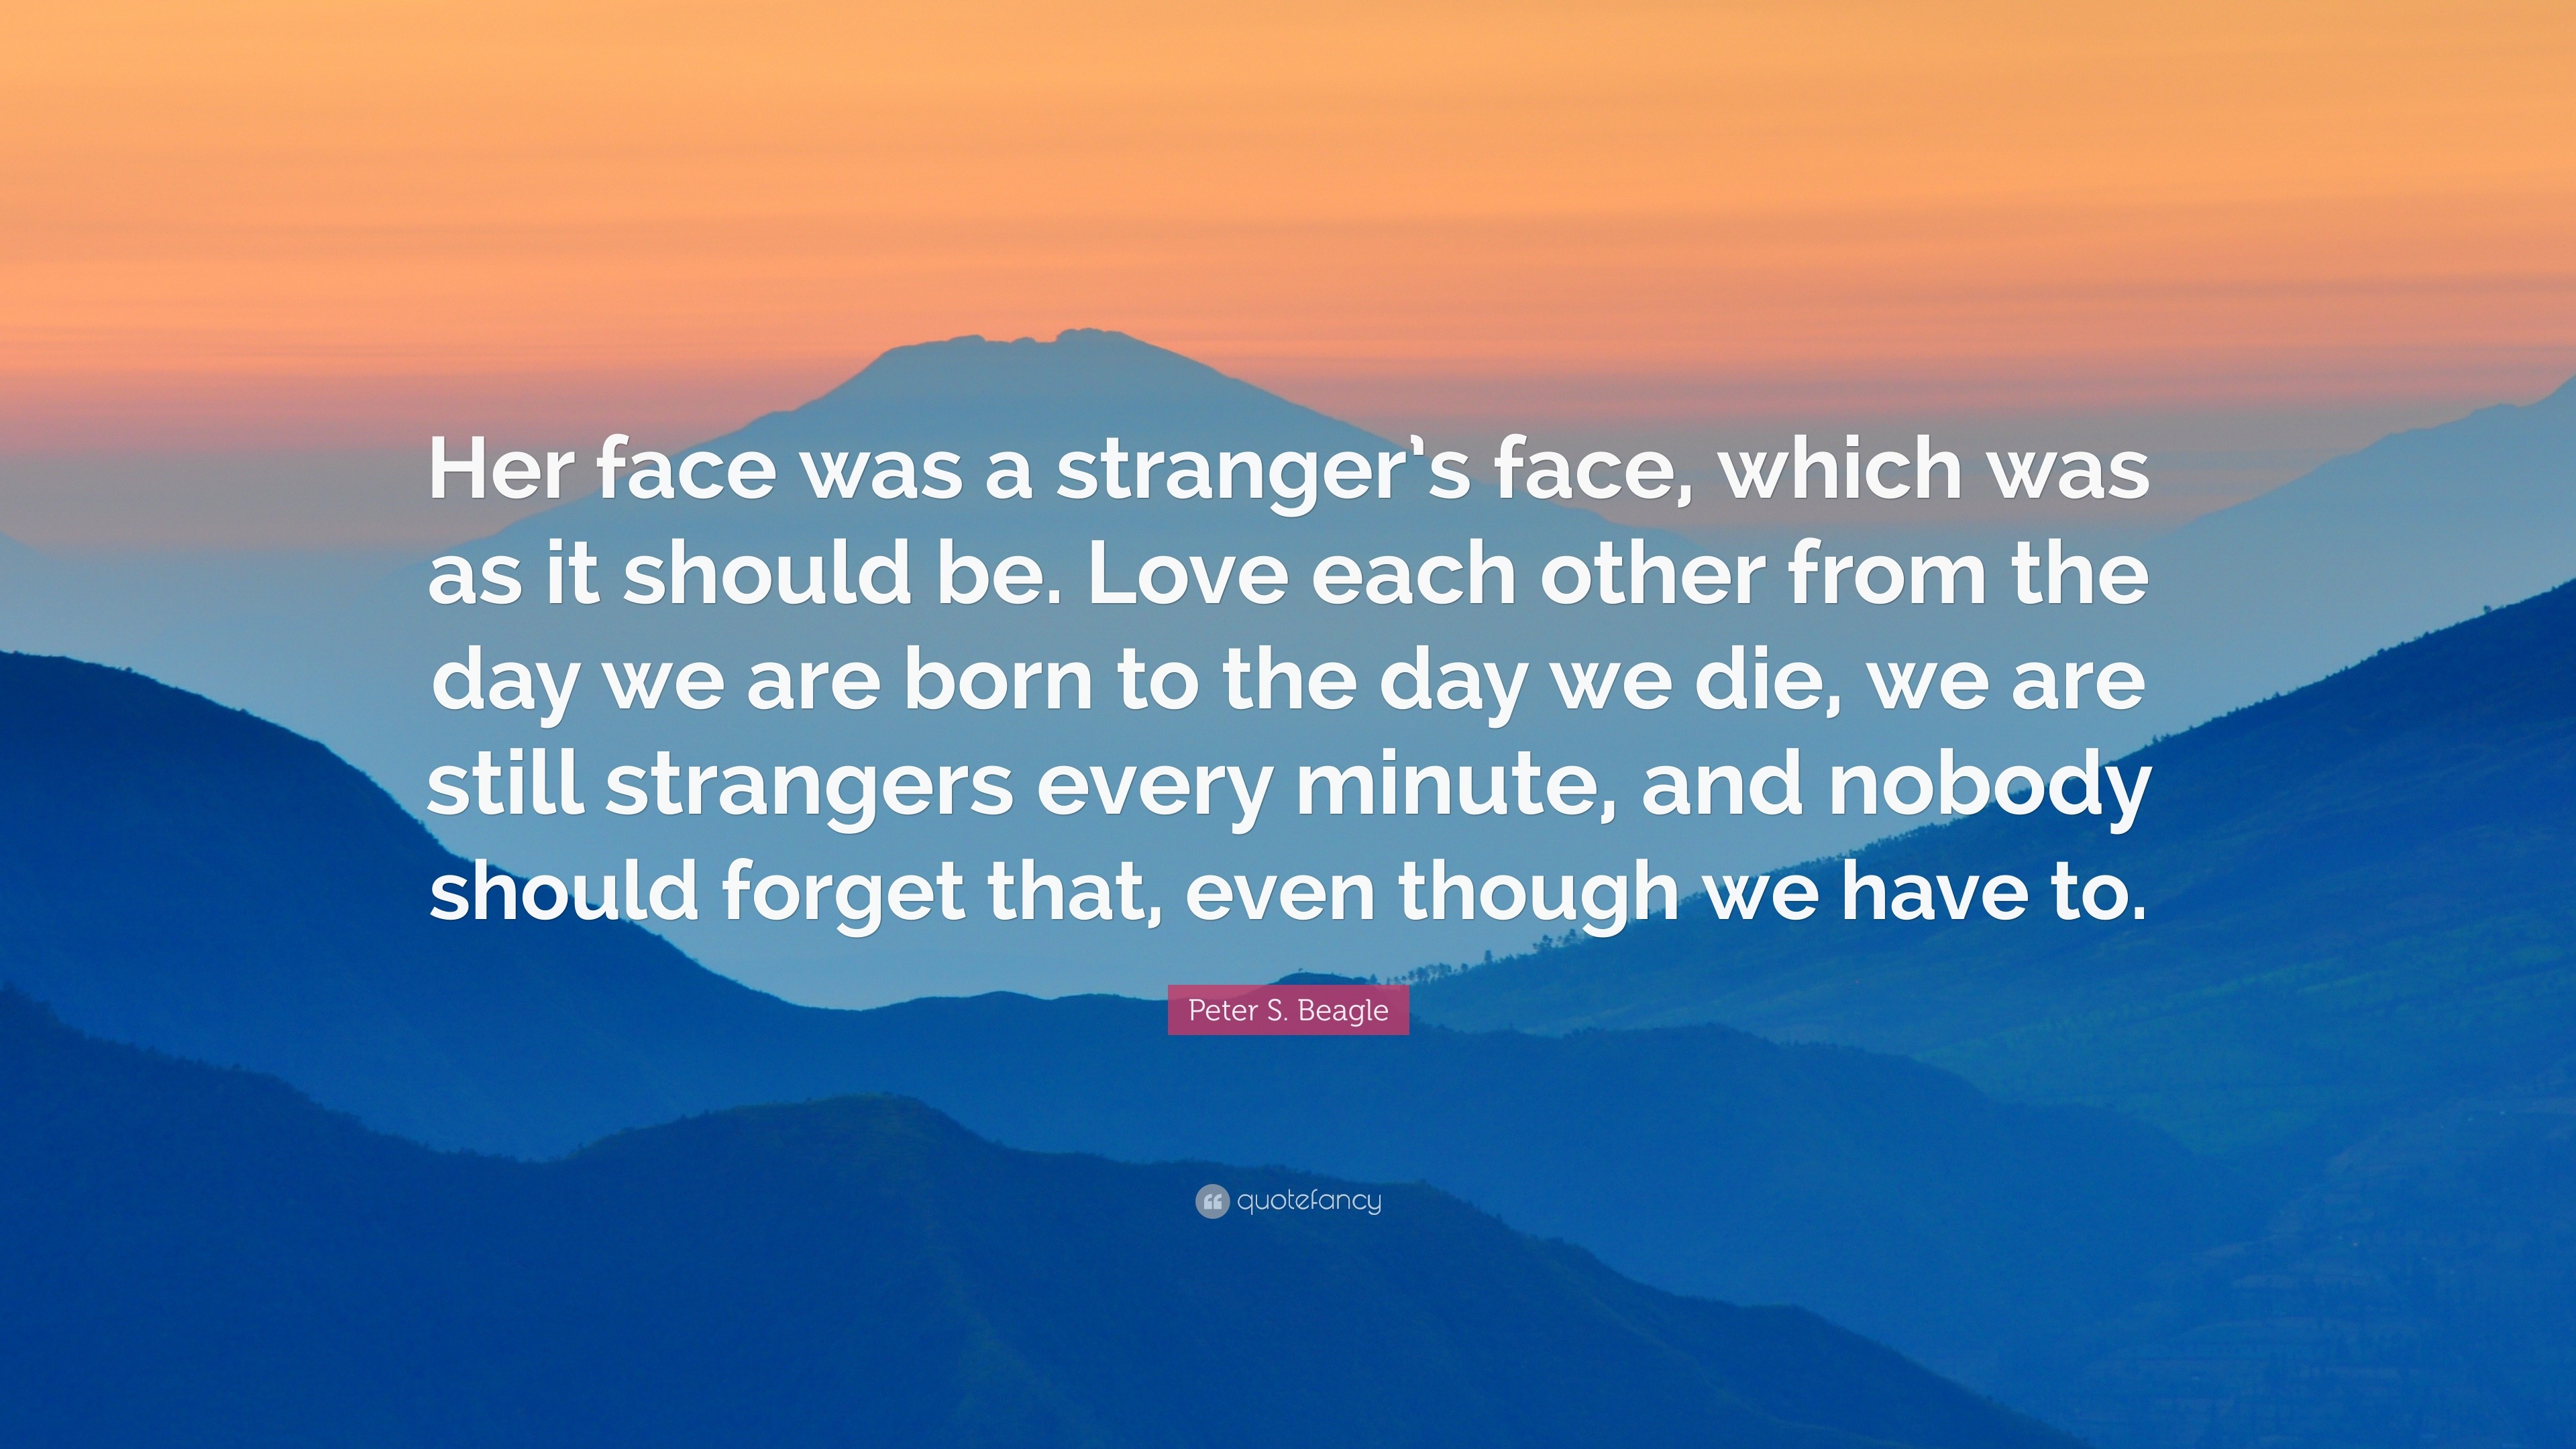 Peter S. Beagle Quote: “Her face was a stranger’s face, which was as it ...